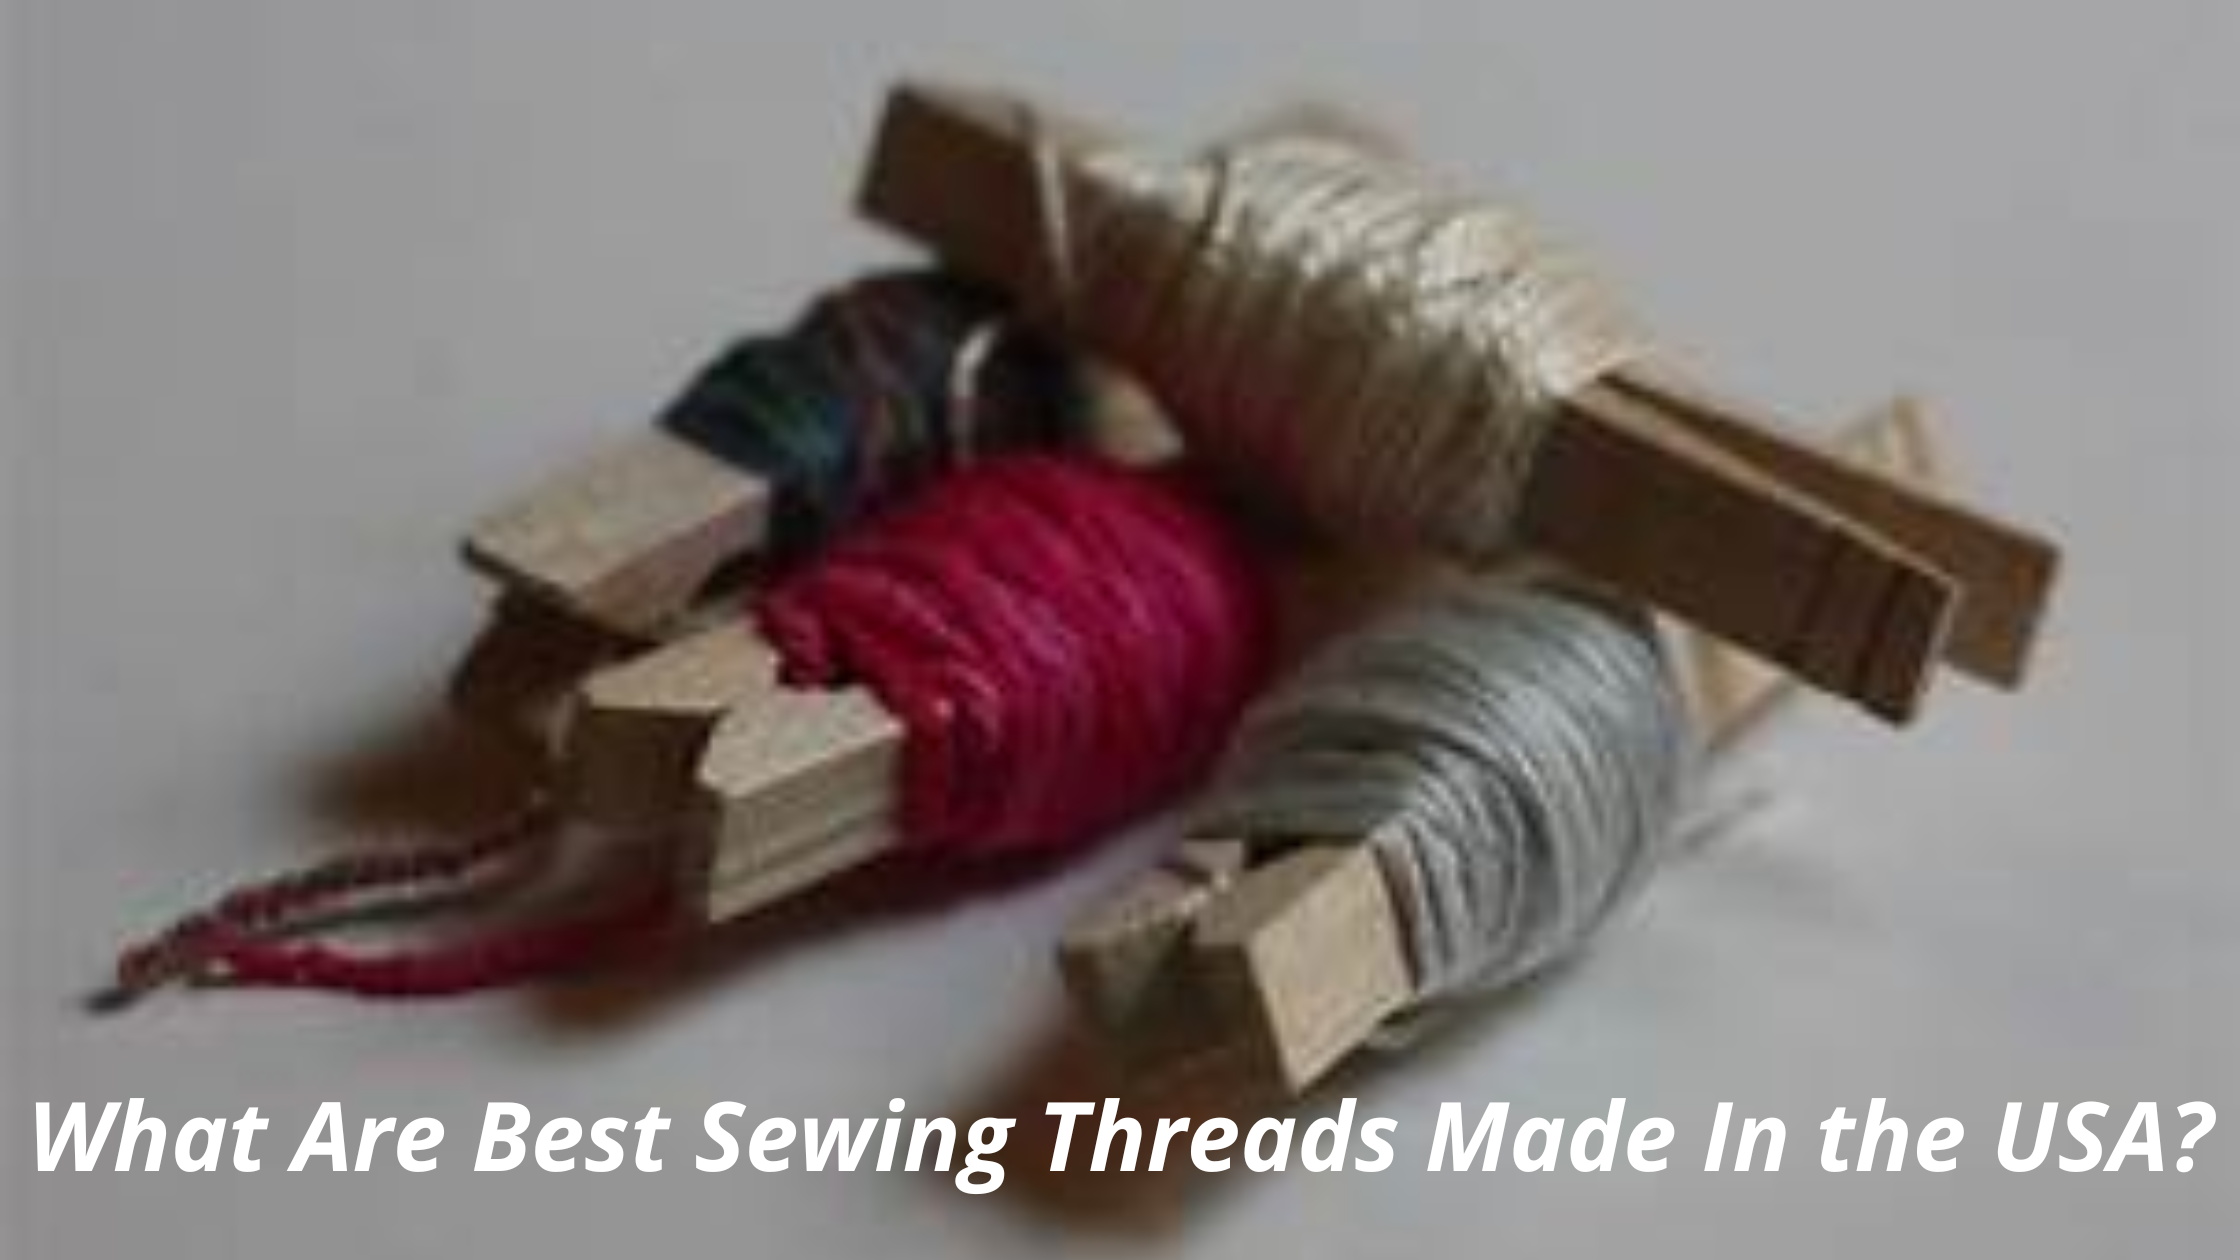 What Are Best Sewing Threads Made In the USA?